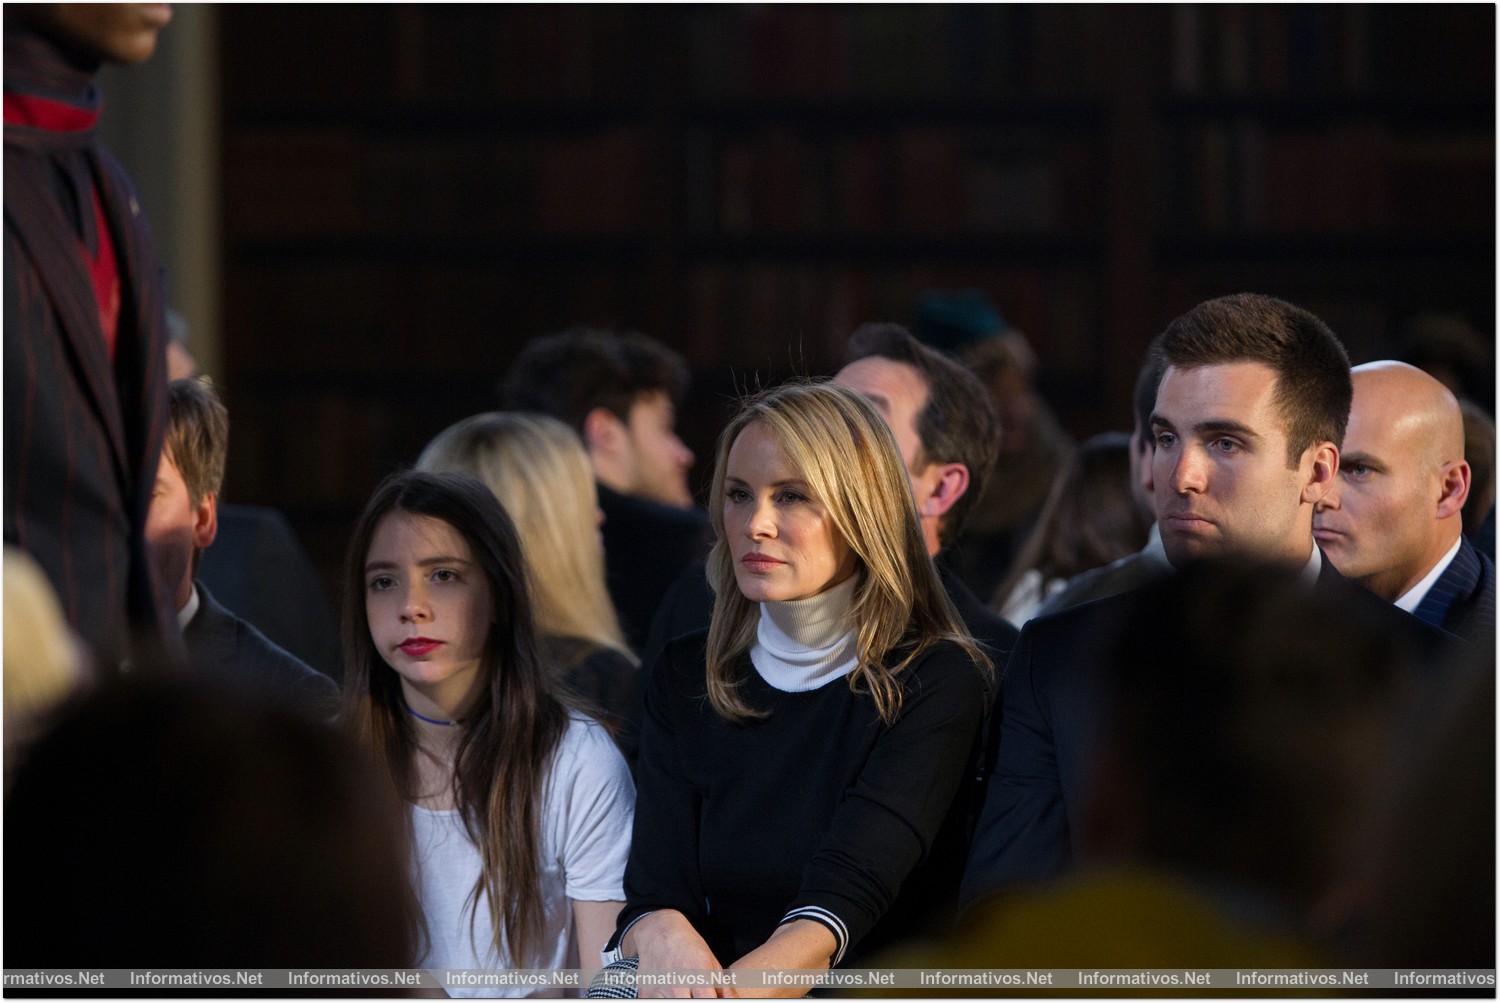 NY08FEB013.- Desfile Tommy Hilfiger Fall 2013 Men's Collection. Elizabeth & Dee Hilfiger, Joe Flacco in the front row